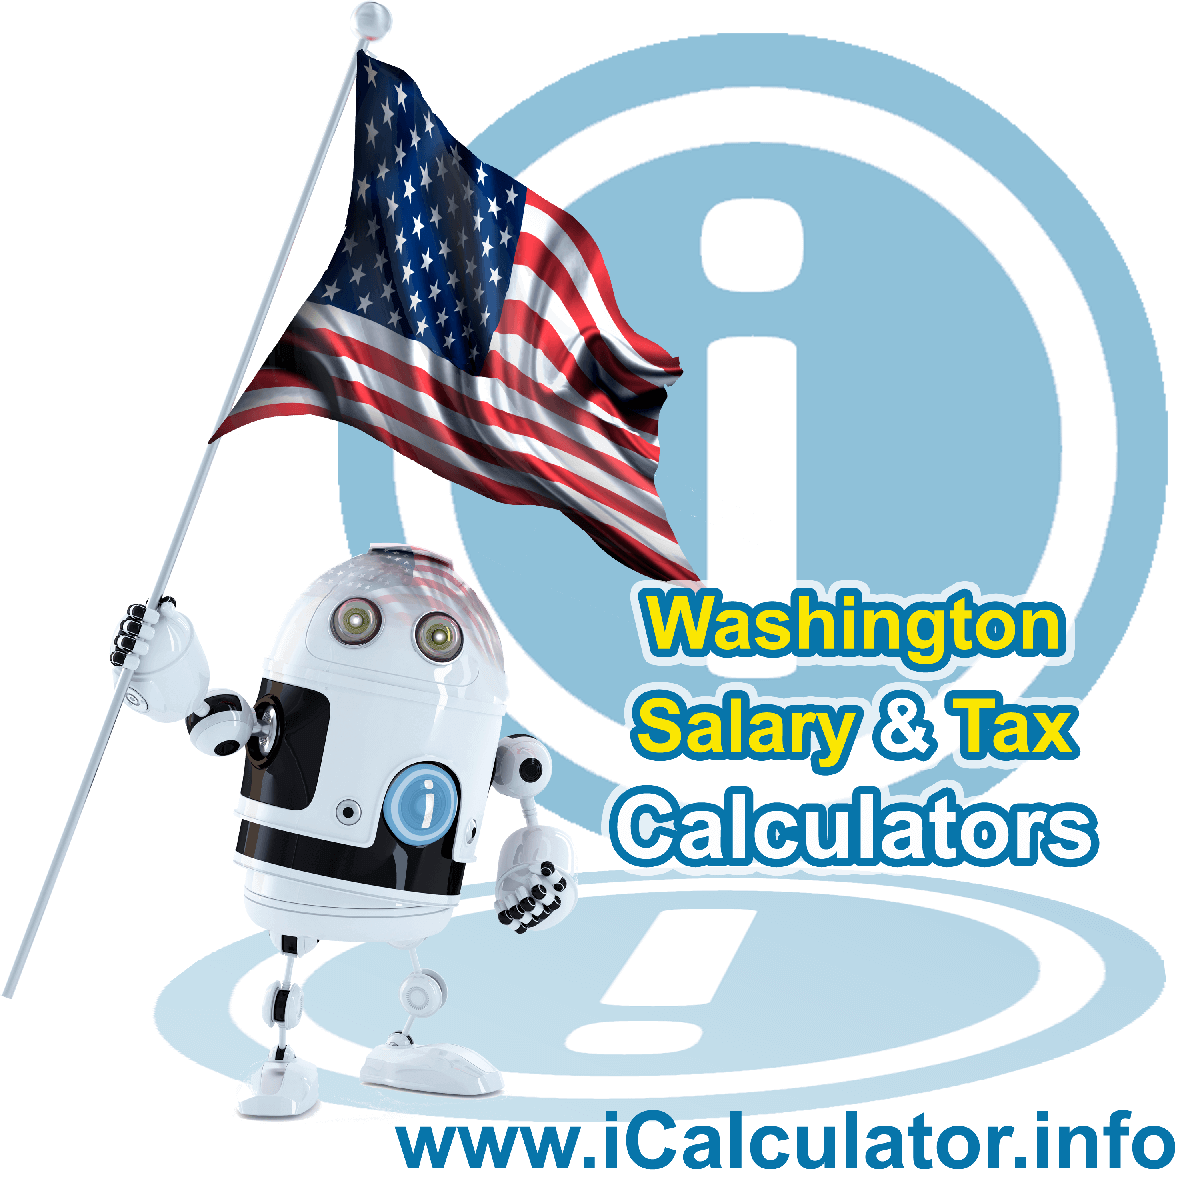 Washington Salary After Tax Calculator 2023 | iCalculator™ | The Washington Salary Calculator, updated for 2023, allows you to quickly calculate your take home pay after tax commitments including Washington State Tax, Federal State Tax, Medicare Deductions, Social Security with Washington state tax tables 